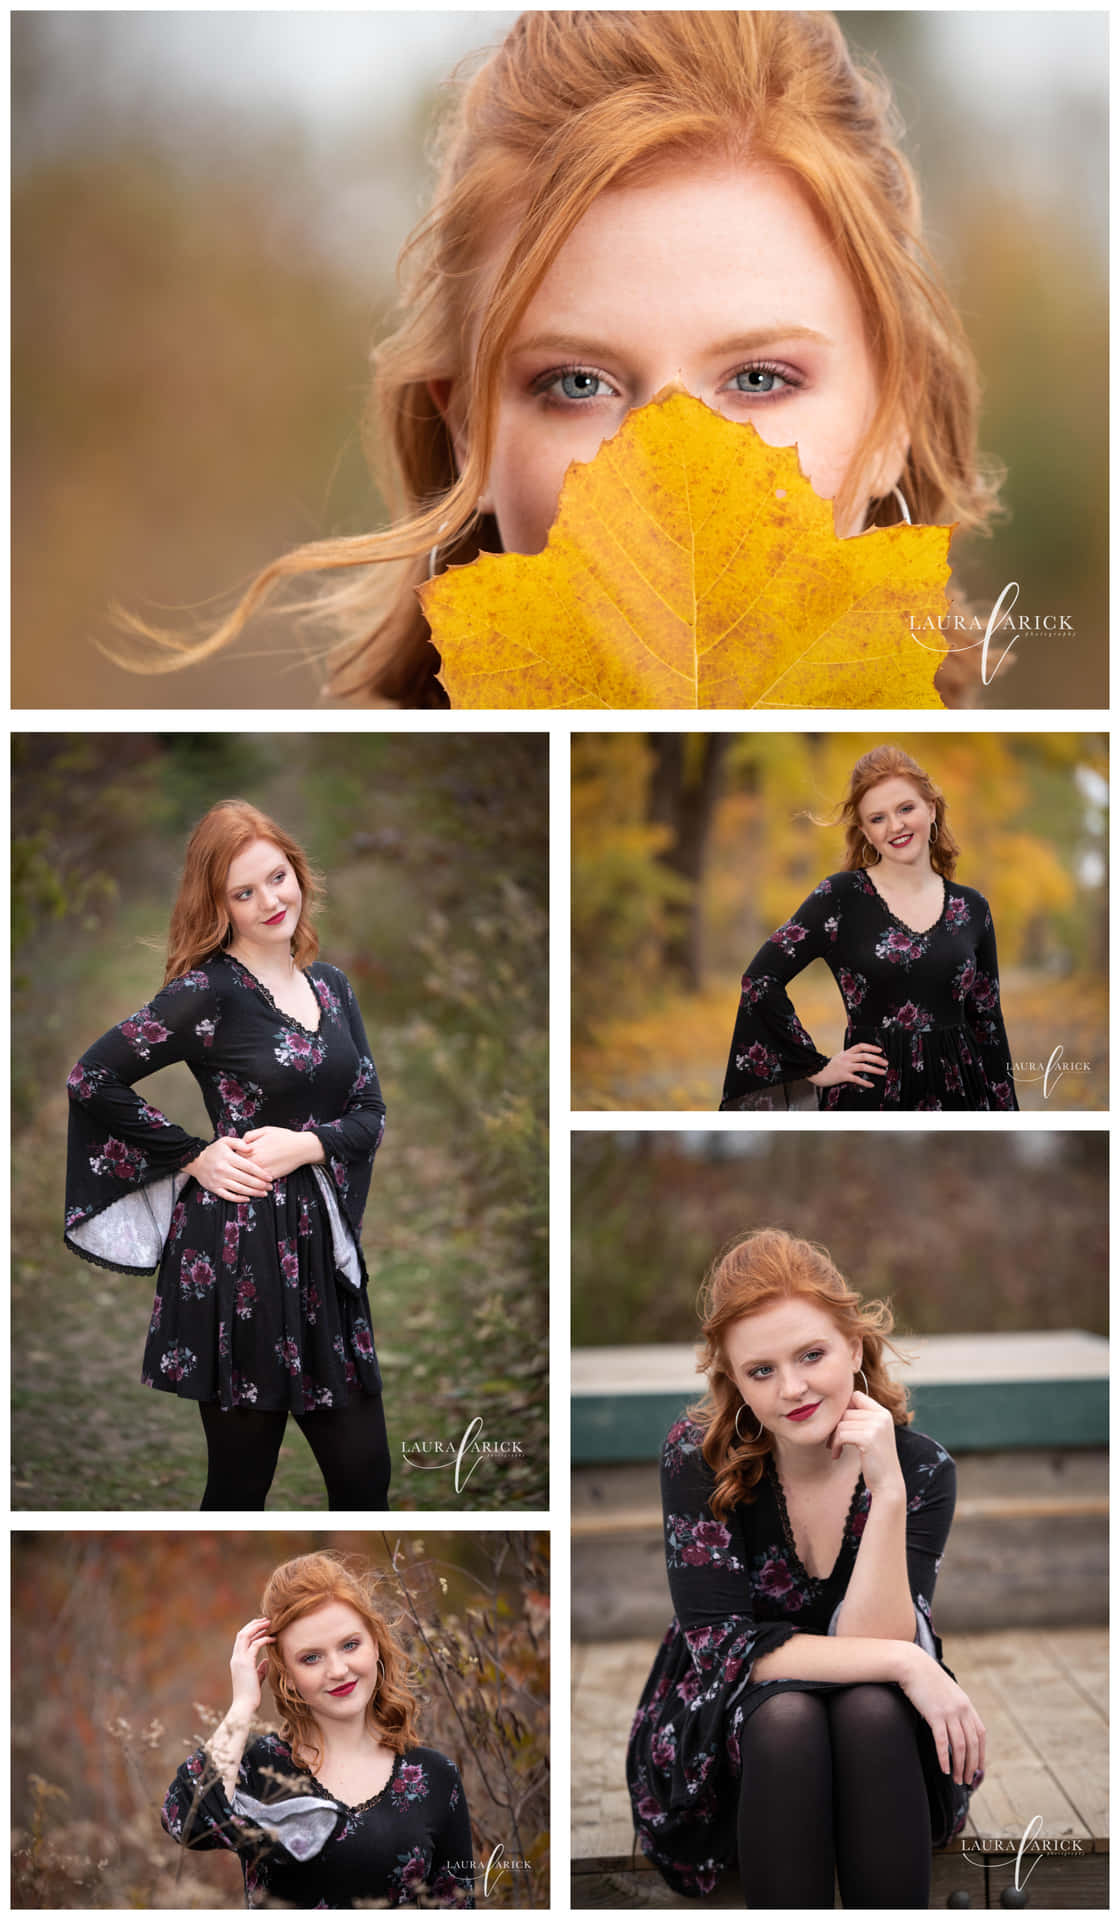 Make the most of your final year with a Fall Senior photoshoot!